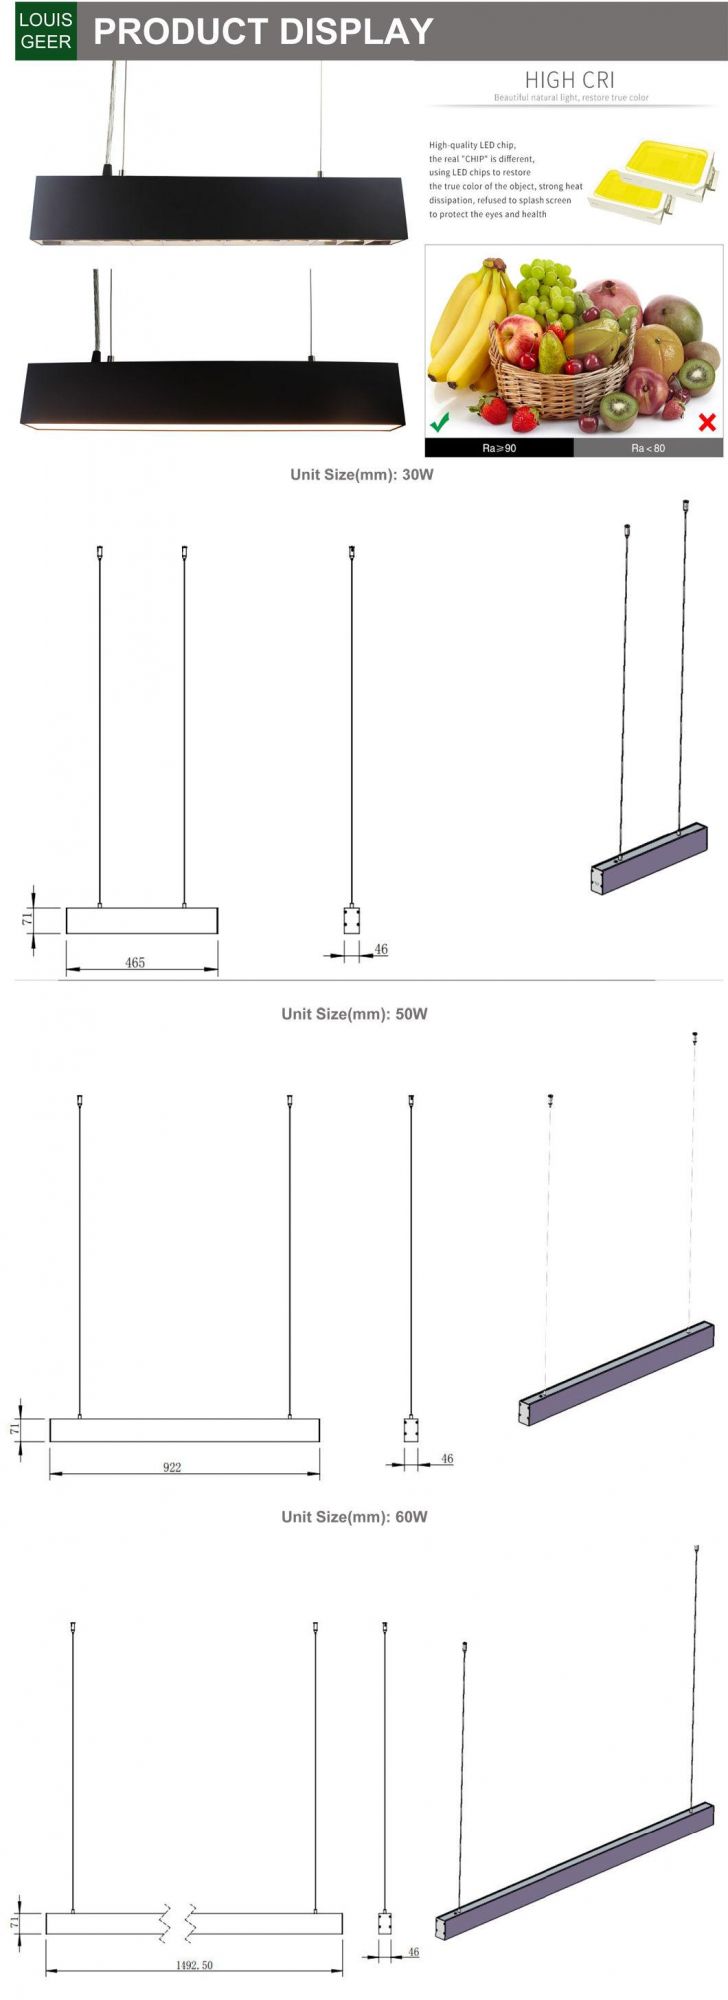 DIY Combinable Linkable System Suspended Fixture Office Pendant LED Linear Light LED Lamp